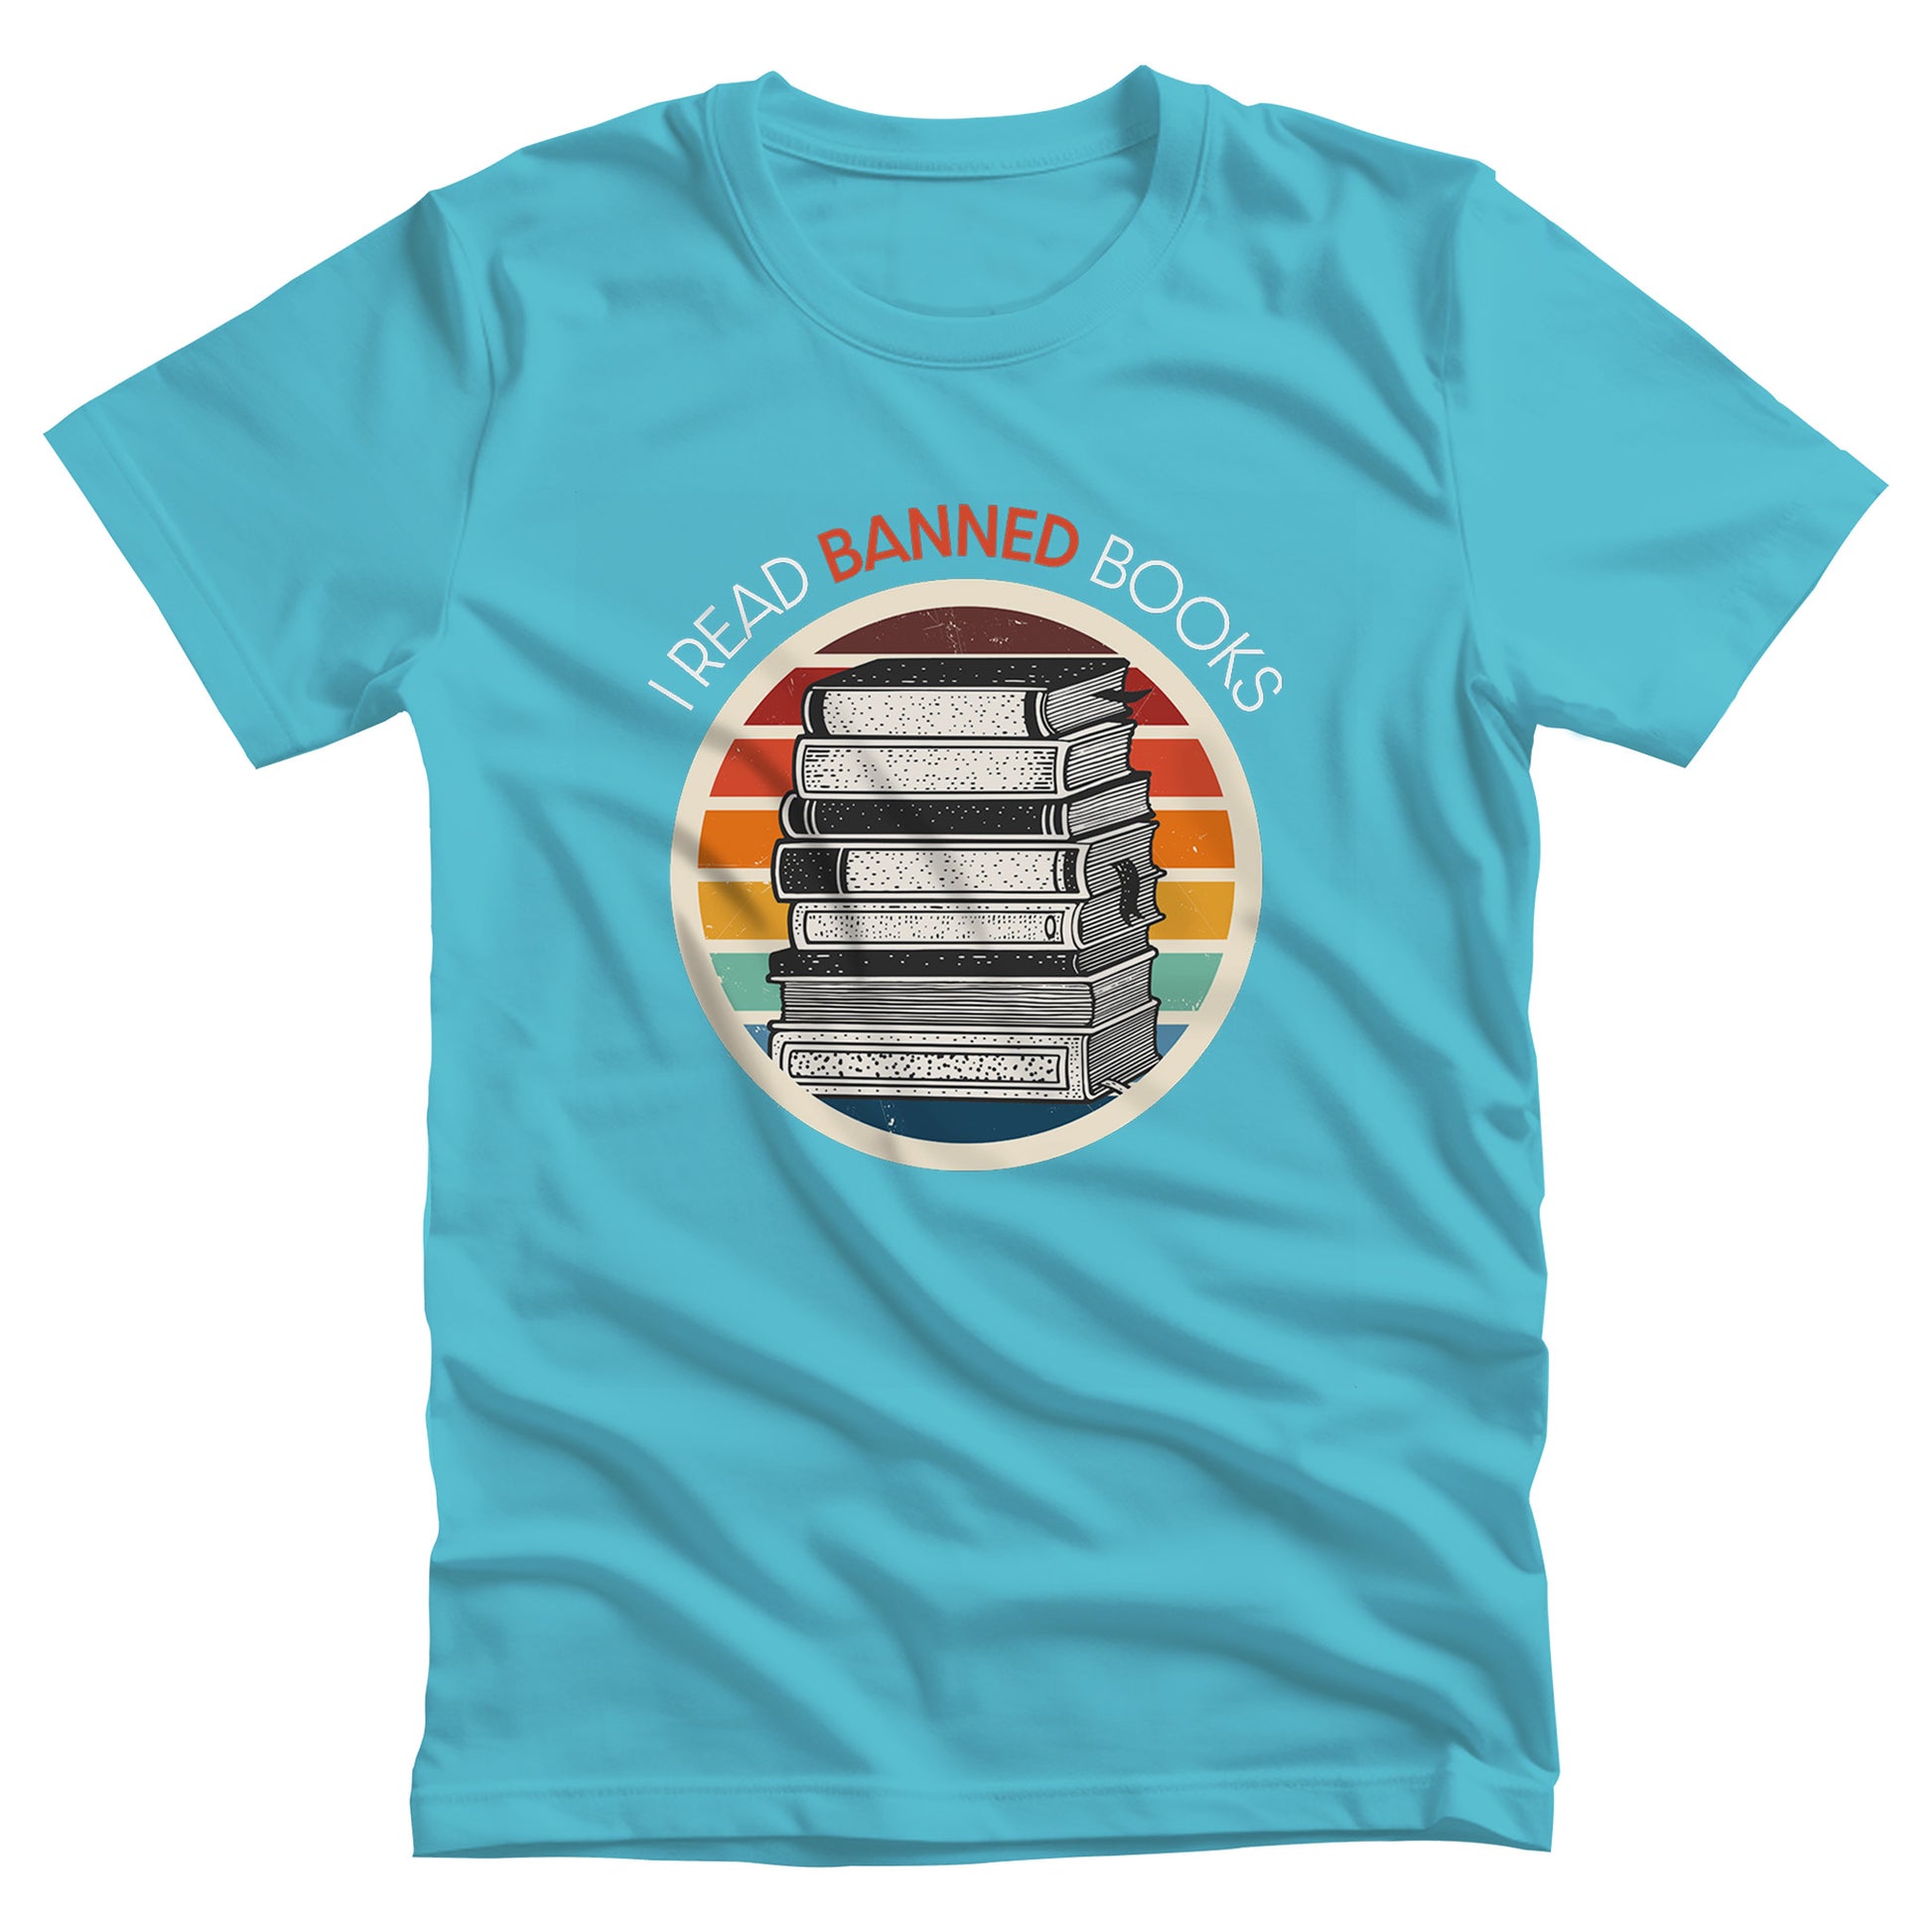 Turquoise unisex t-shirt with a circular graphic of stacked old books with a vintage sunset made from horizontal lines behind it. “I READ BANNED BOOKS” is arched over the graphic with the word. “BANNED” an orange color.